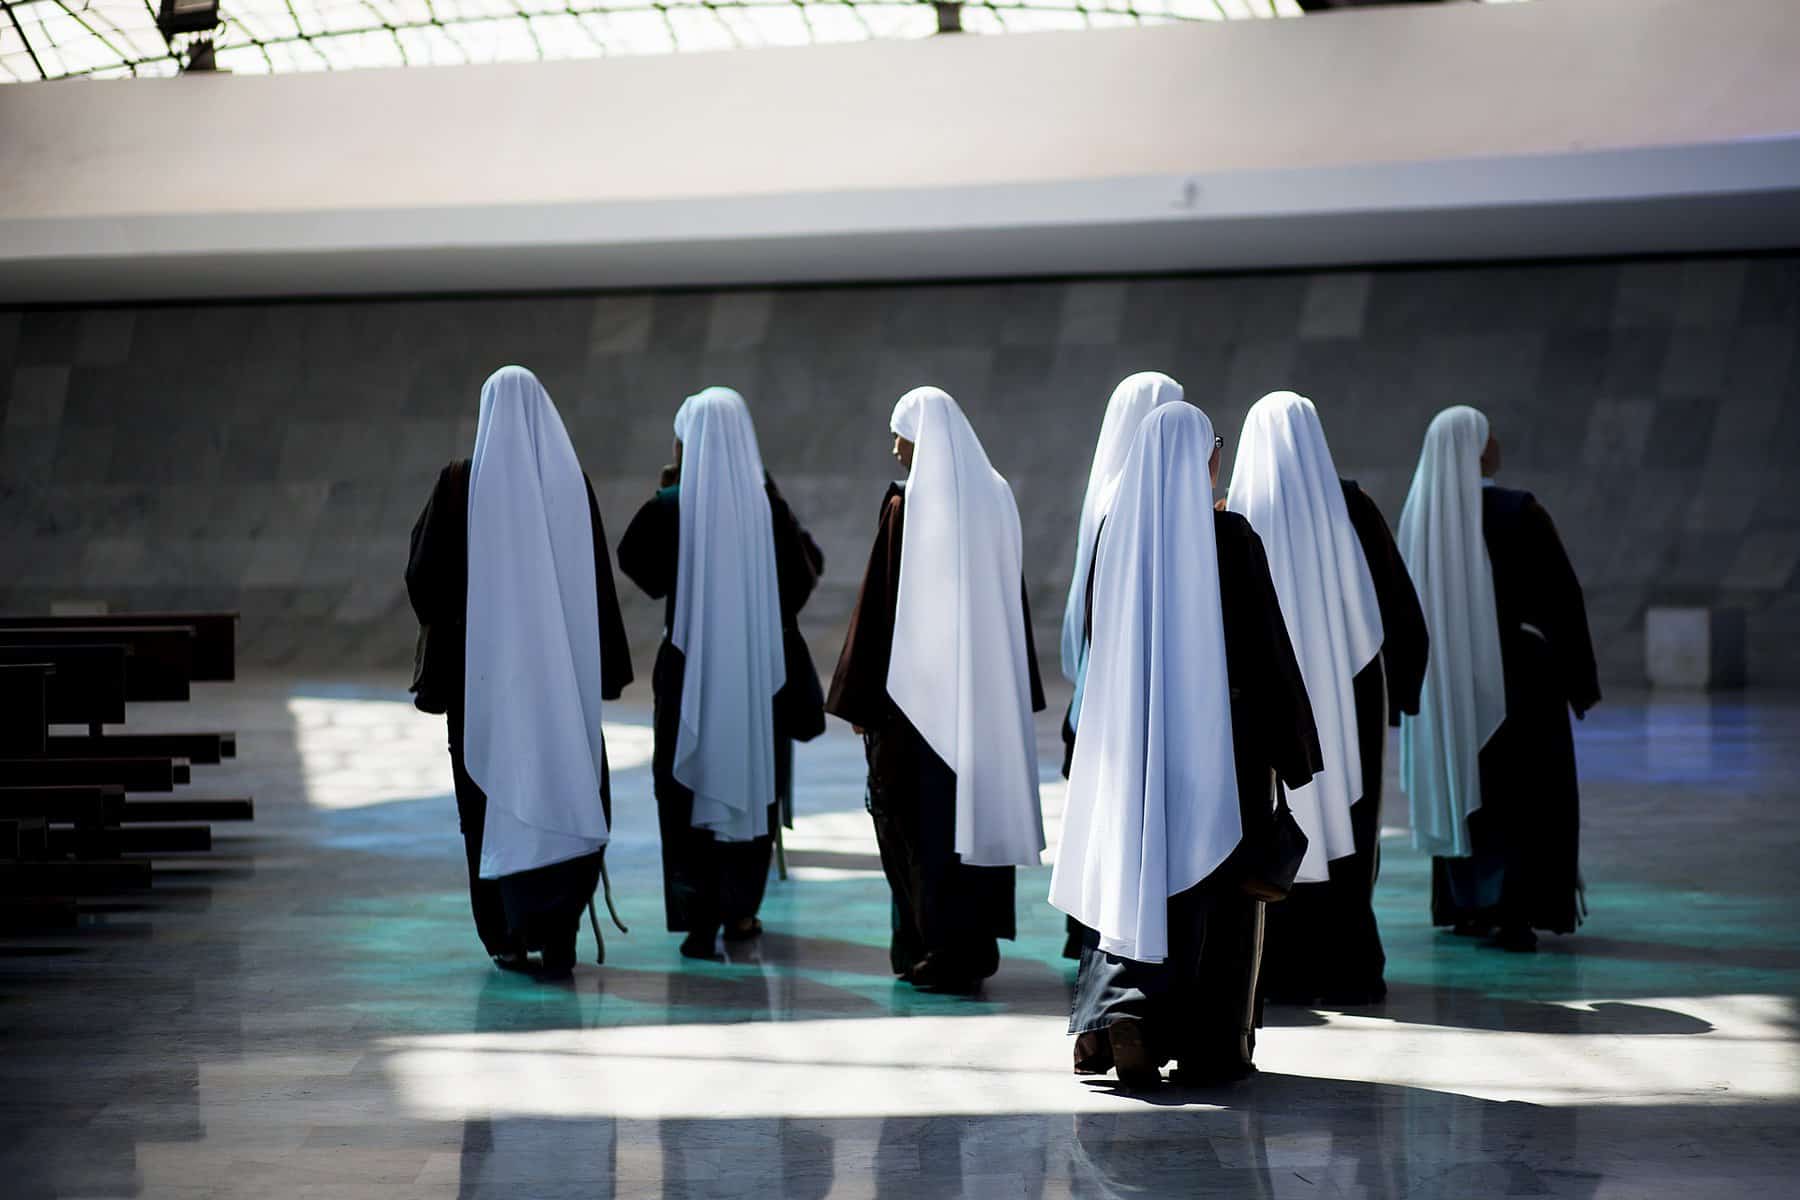 A group of nuns are shown from behind walking away.